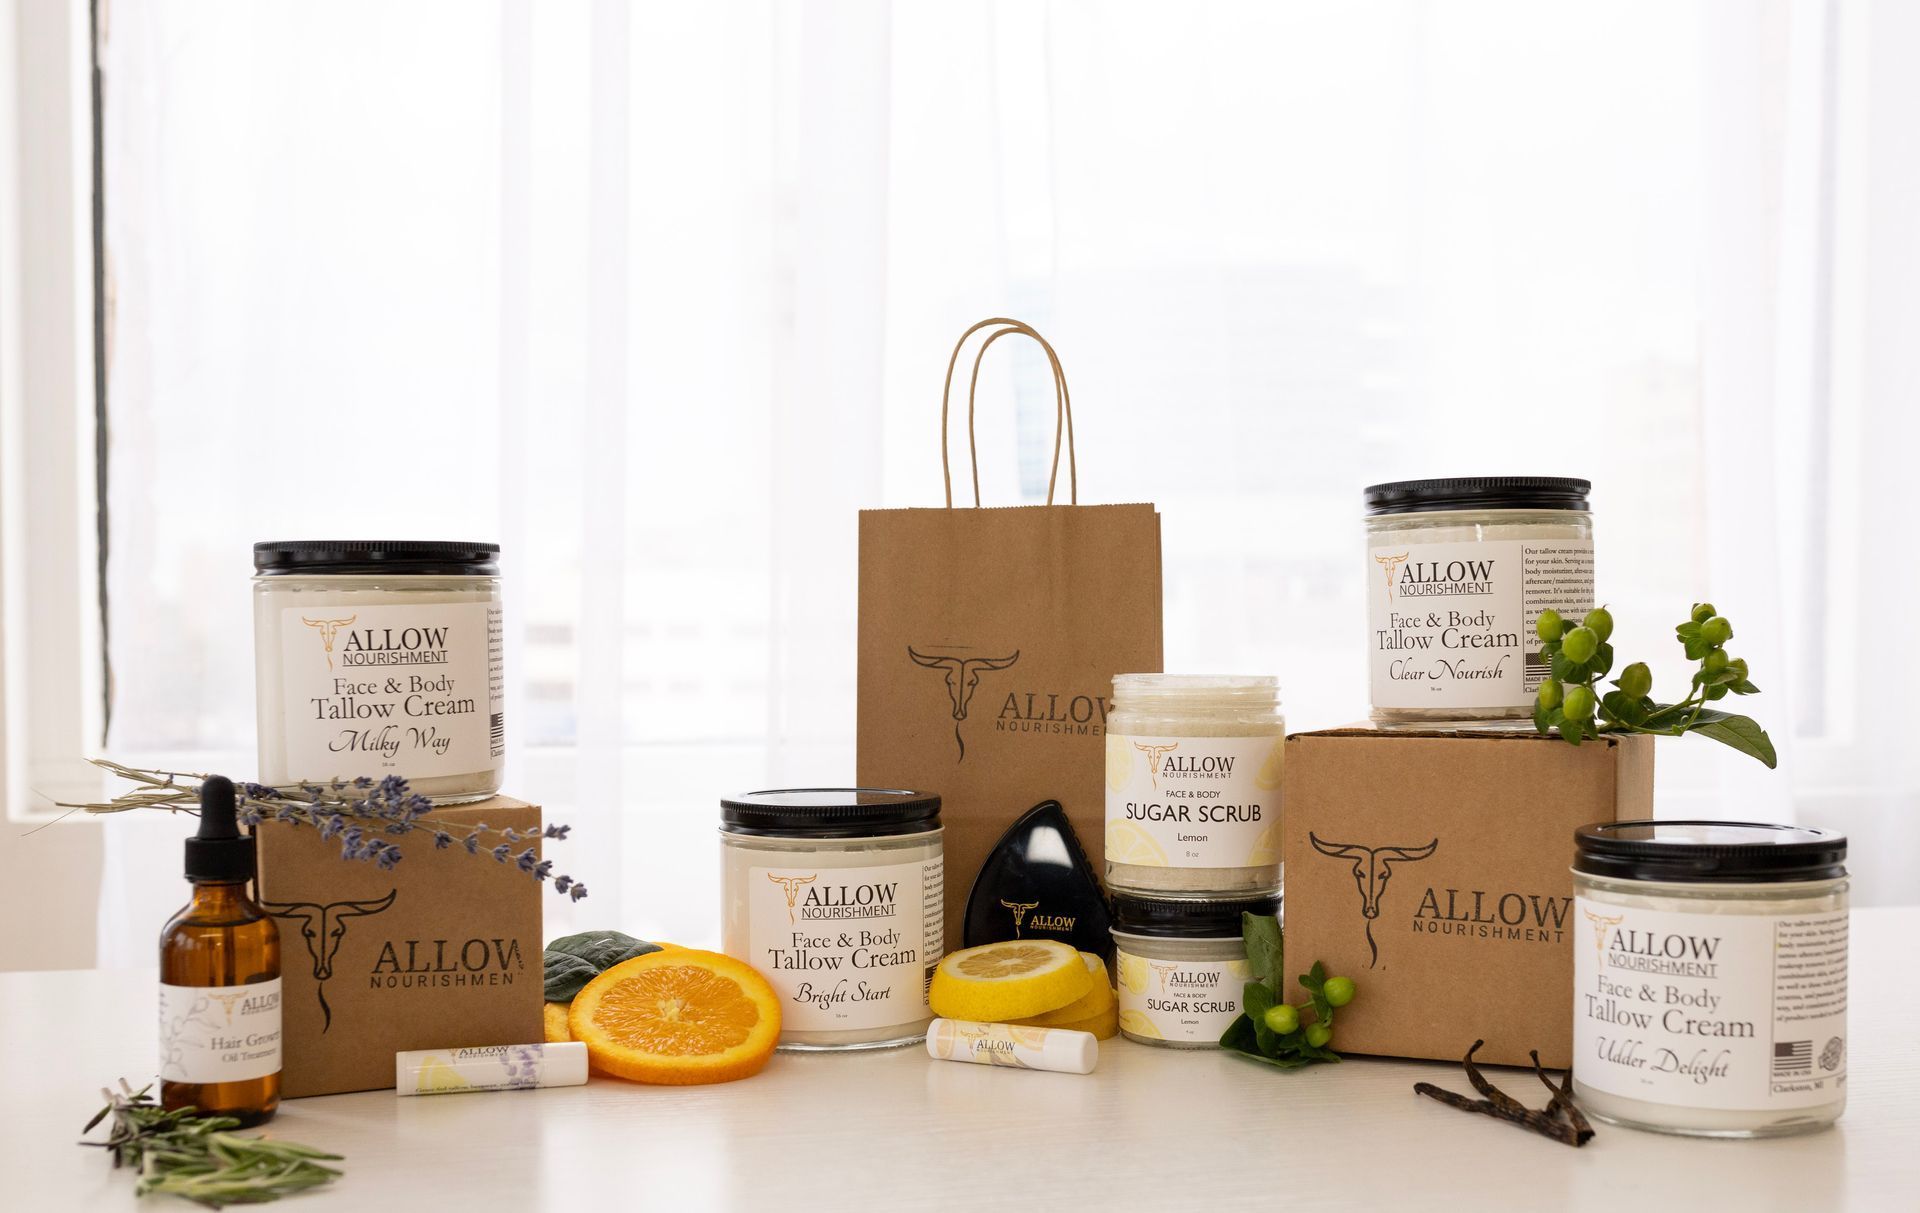 Allow Nourishment tallow skincare products